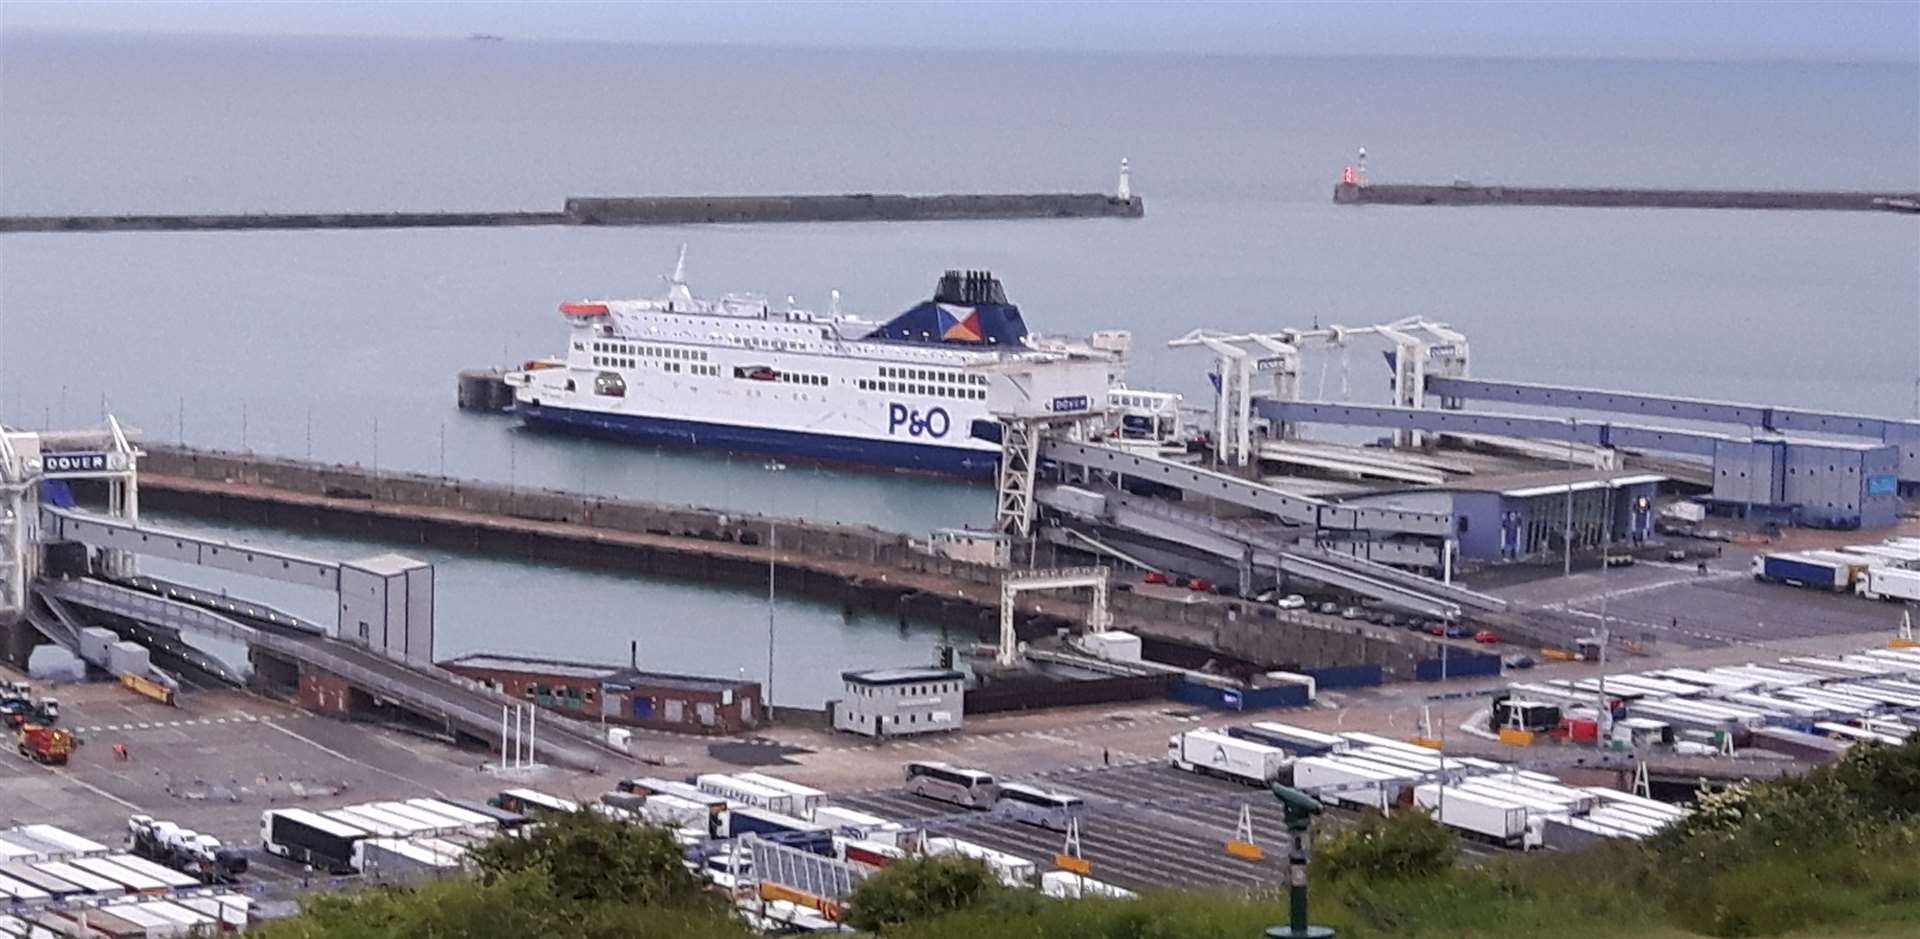 A planned protest at the Port of Dover has been cancelled